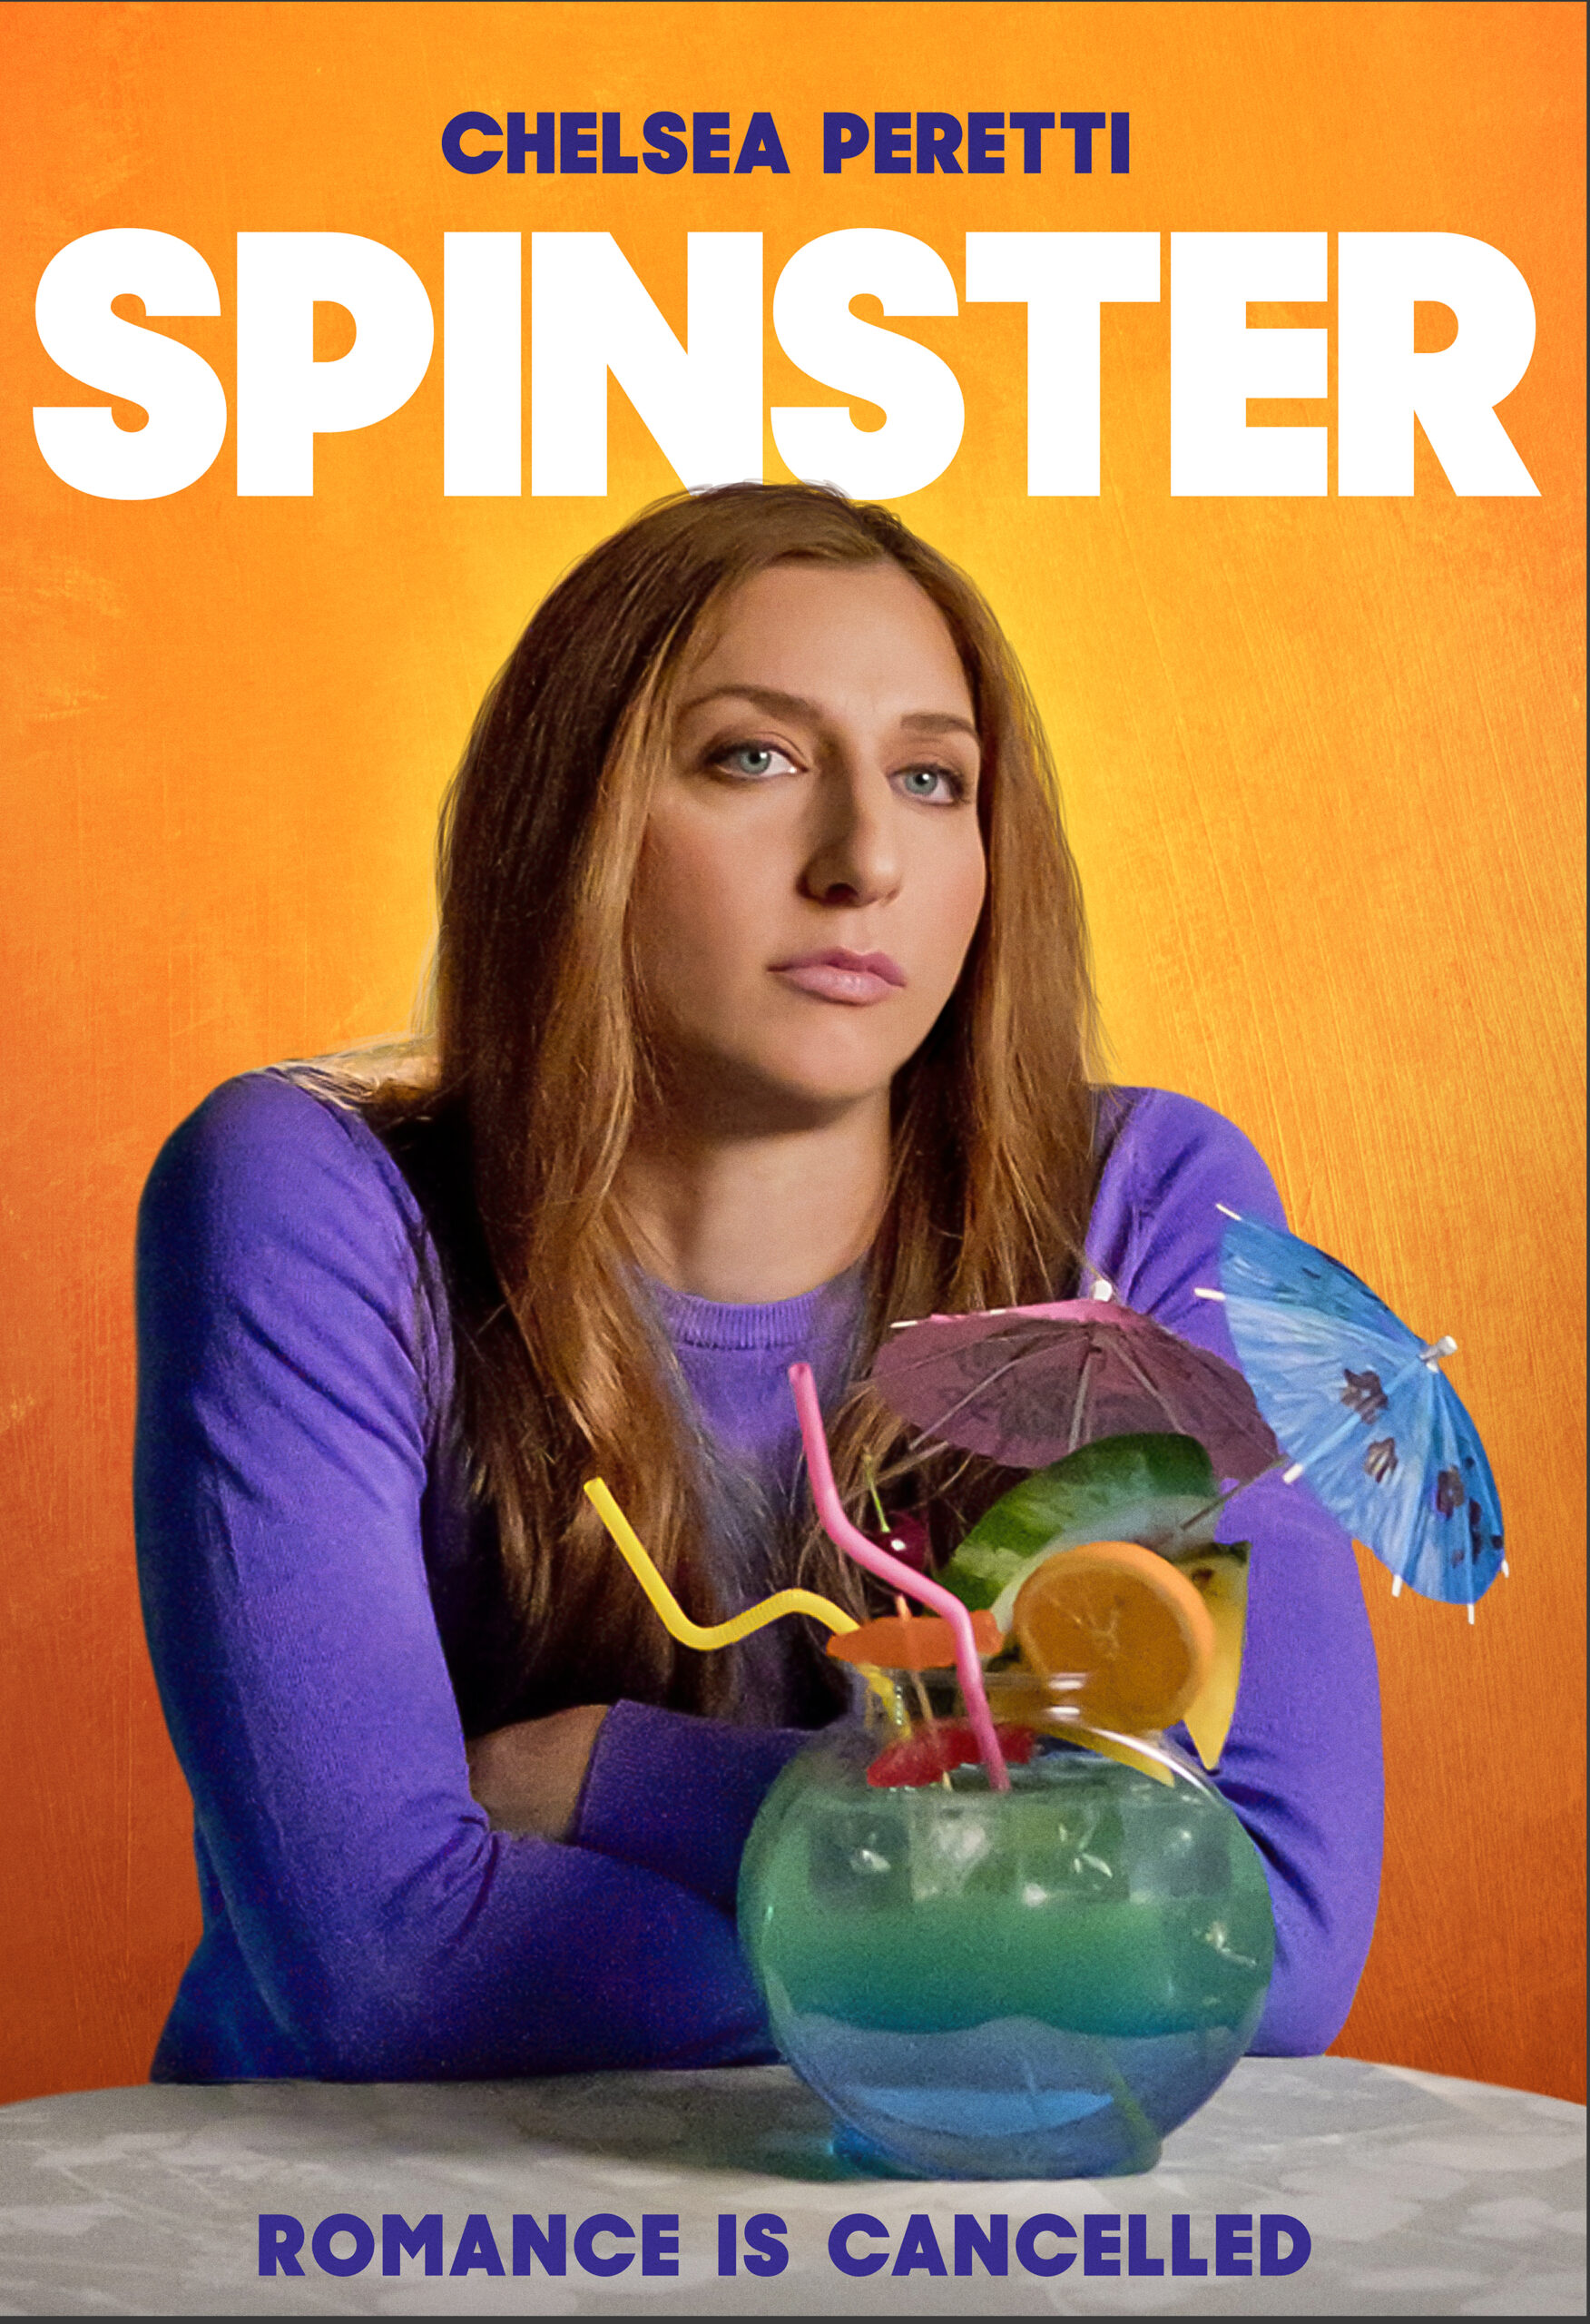 Spinster movie poster, featuring Chelsea Peretti sitting with a fishbowl cocktail